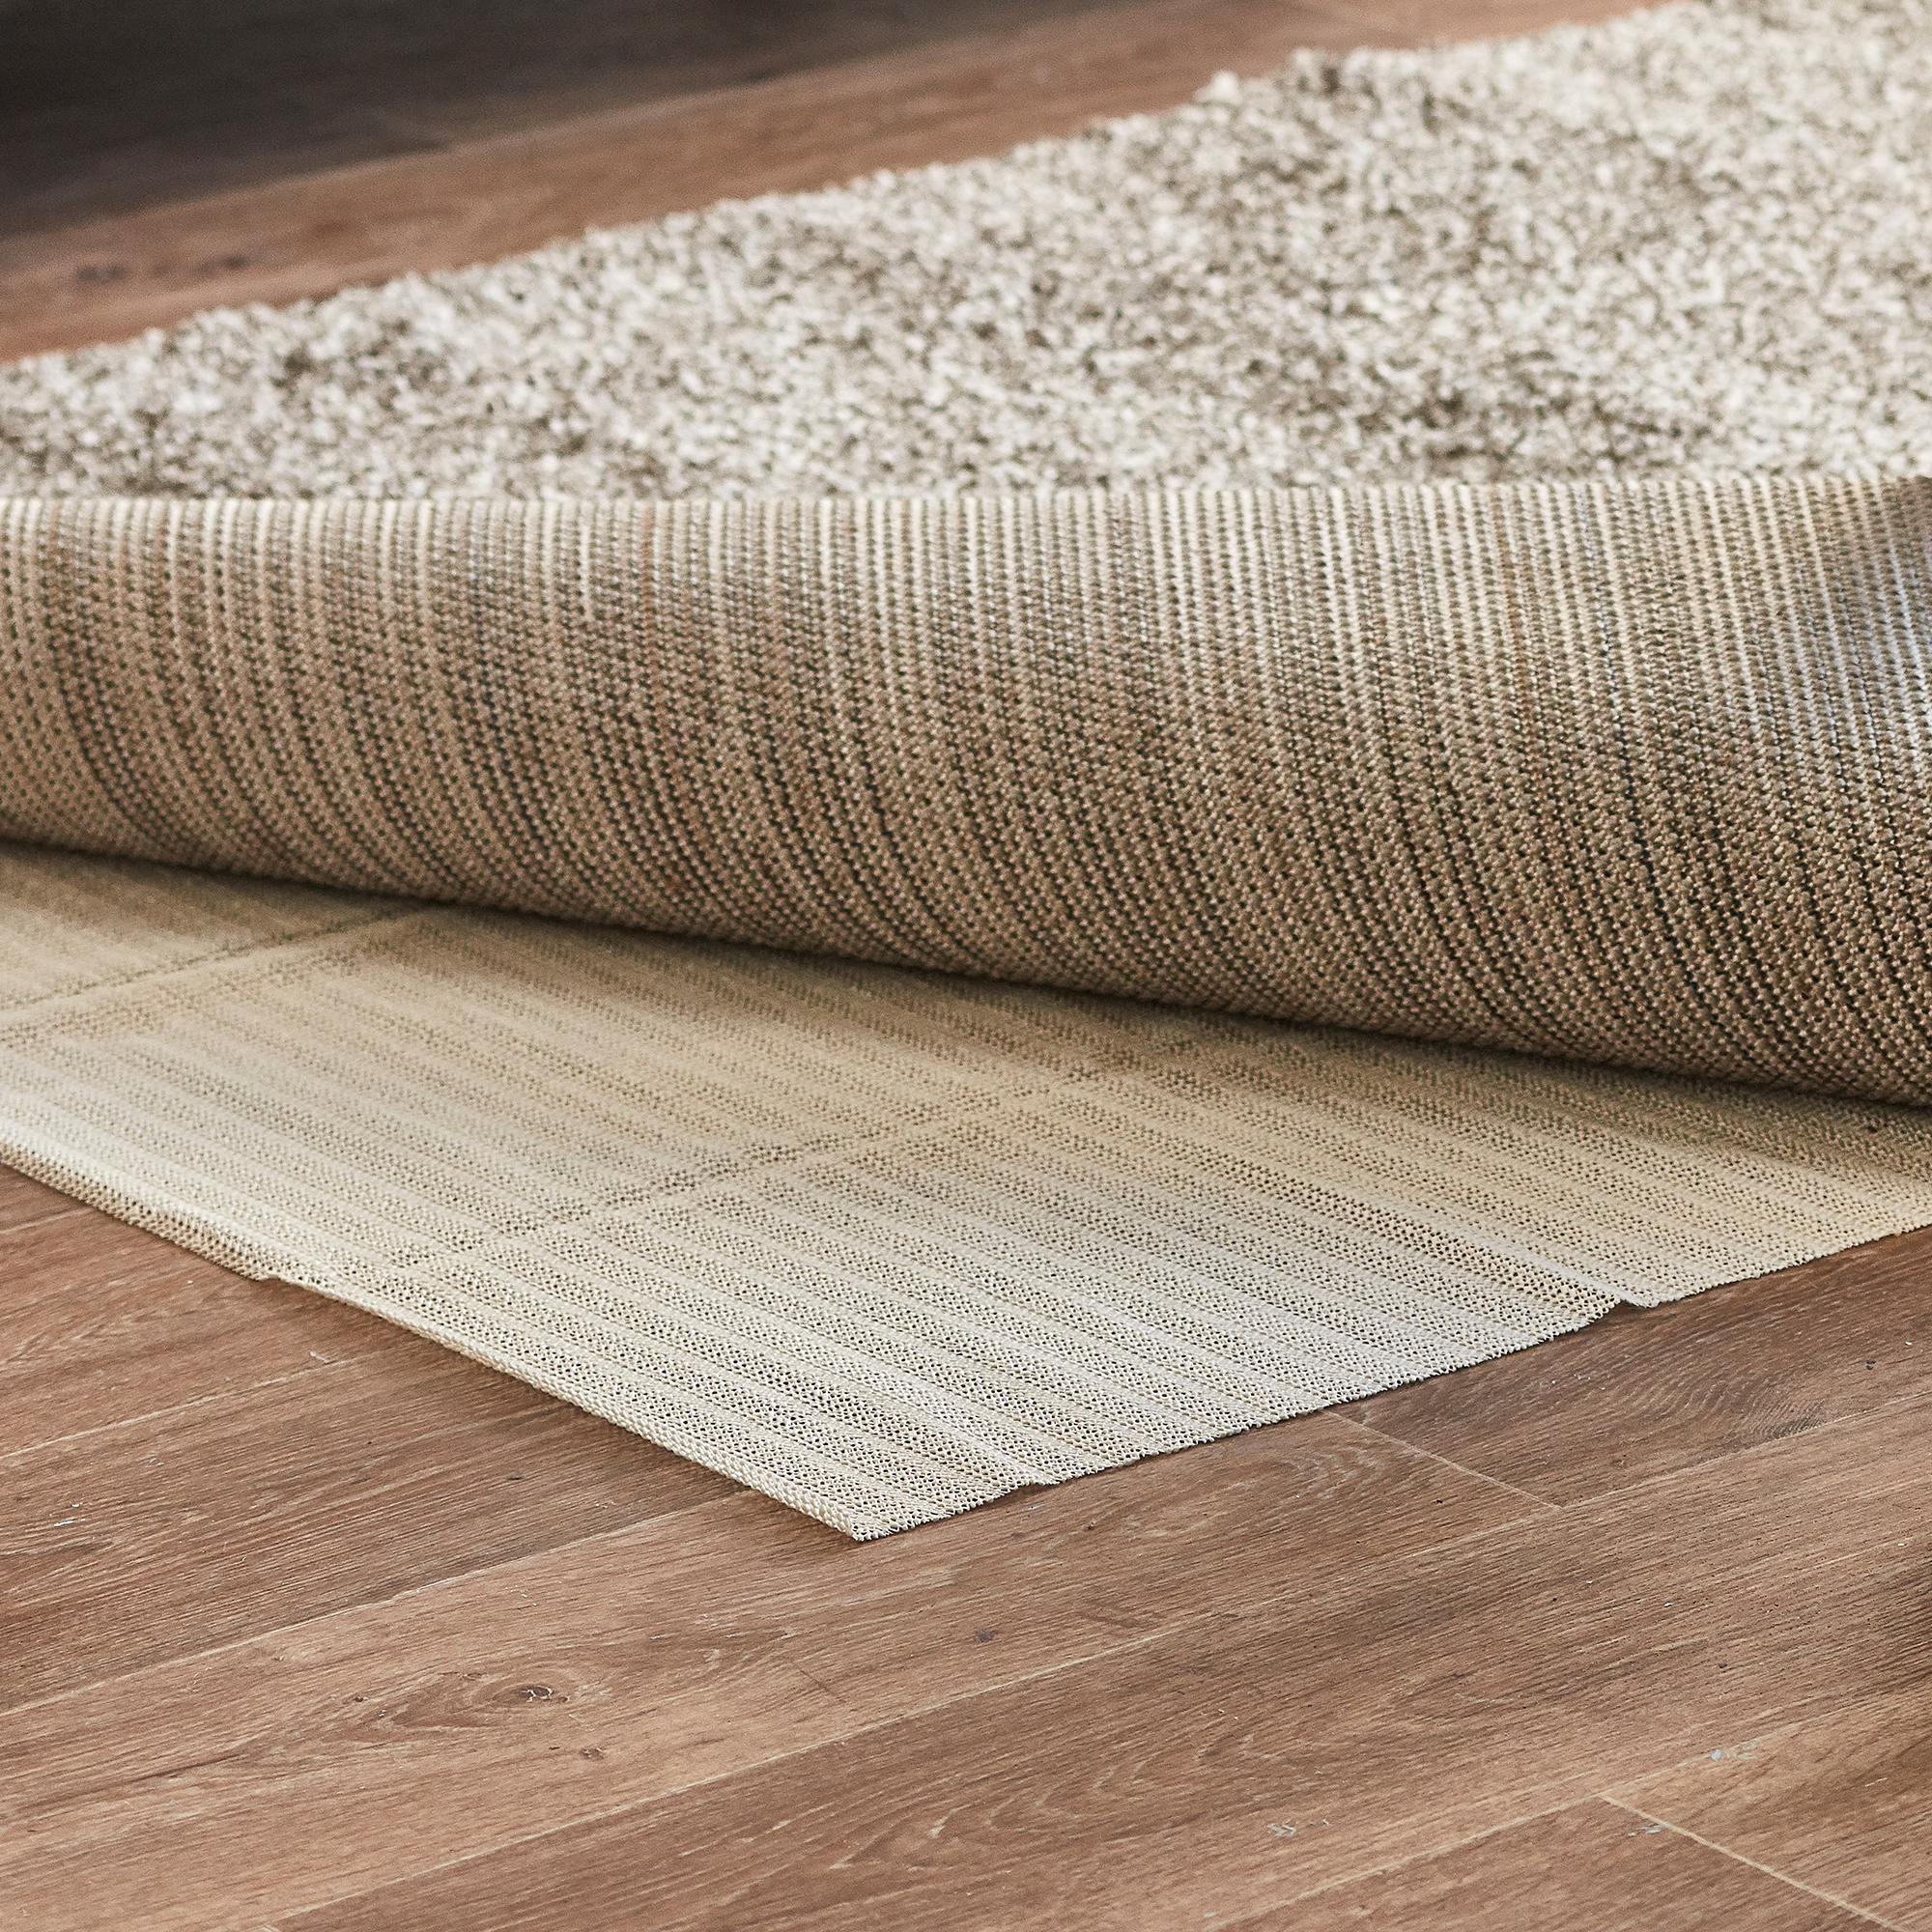 Network Rug Pad For Wooden Tiled, Do You Need A Rug Pad On Hardwood Floors